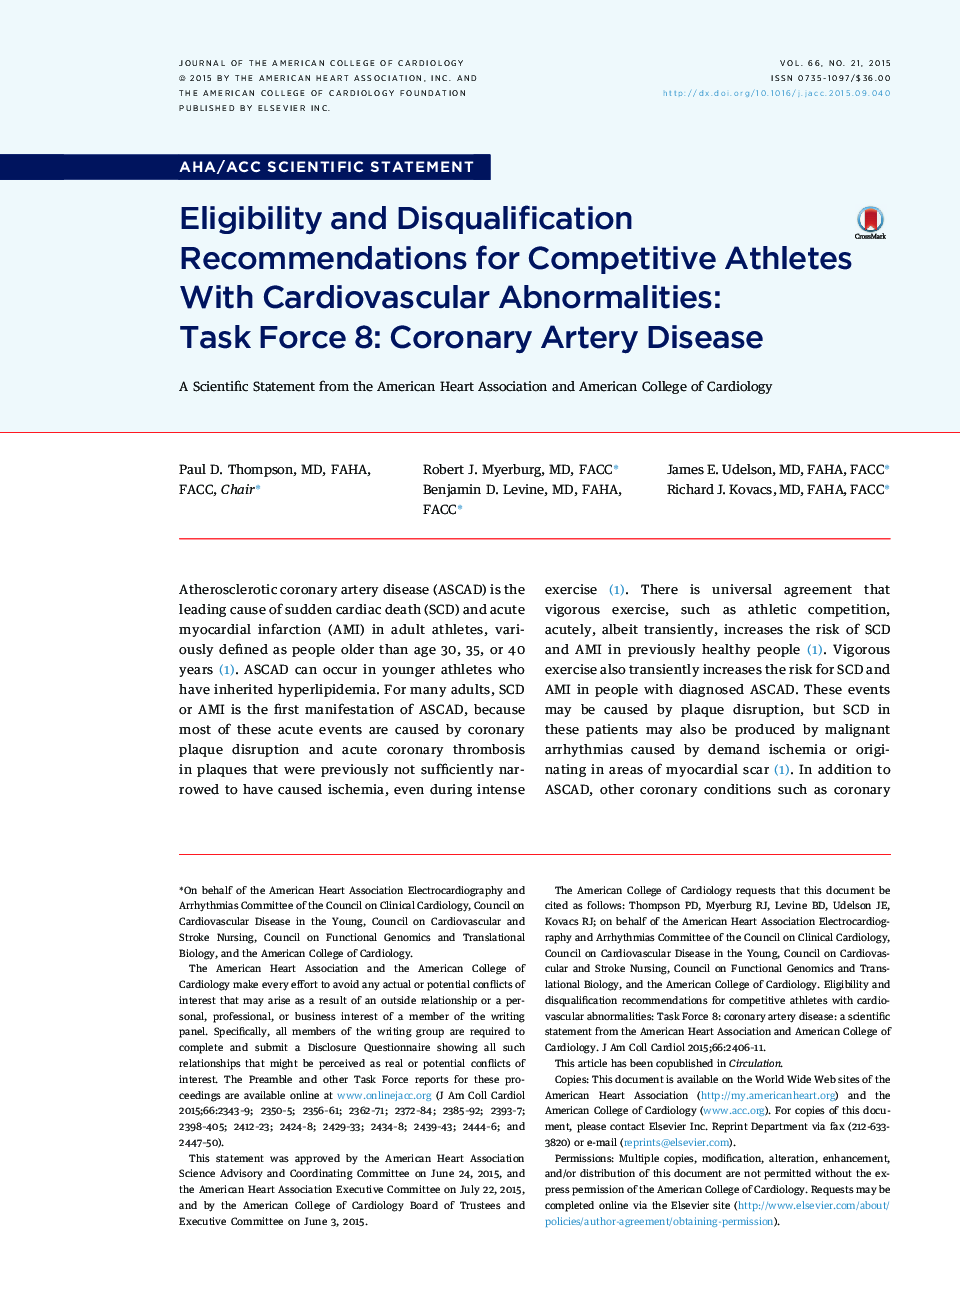 Eligibility and Disqualification Recommendations for Competitive Athletes With Cardiovascular Abnormalities: Task Force 8: Coronary Artery Disease